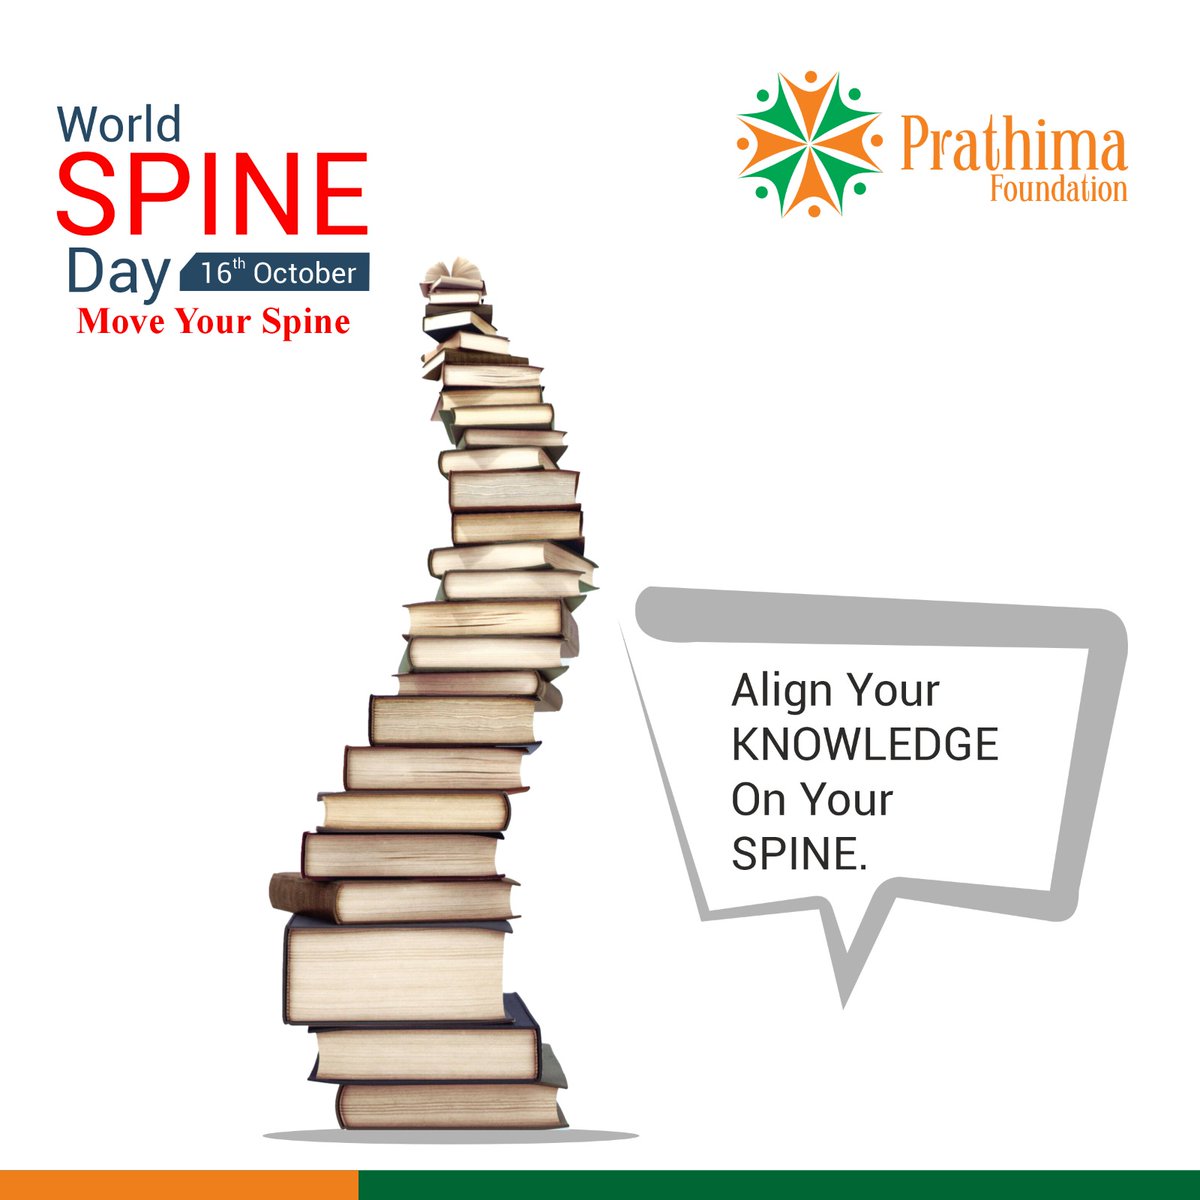 Align Your KNOWLEDGE On Your SPINE.

#WorldSpineDay #LoveYourSpine #HealthyBack #SpineHealth #BackPainAwareness #PostureMatters #StrongBack #SpinalHealth #BackCare #Move4YourSpine #SpineAwareness #trending #trendingnow #prathimafpundation #prathima #PF